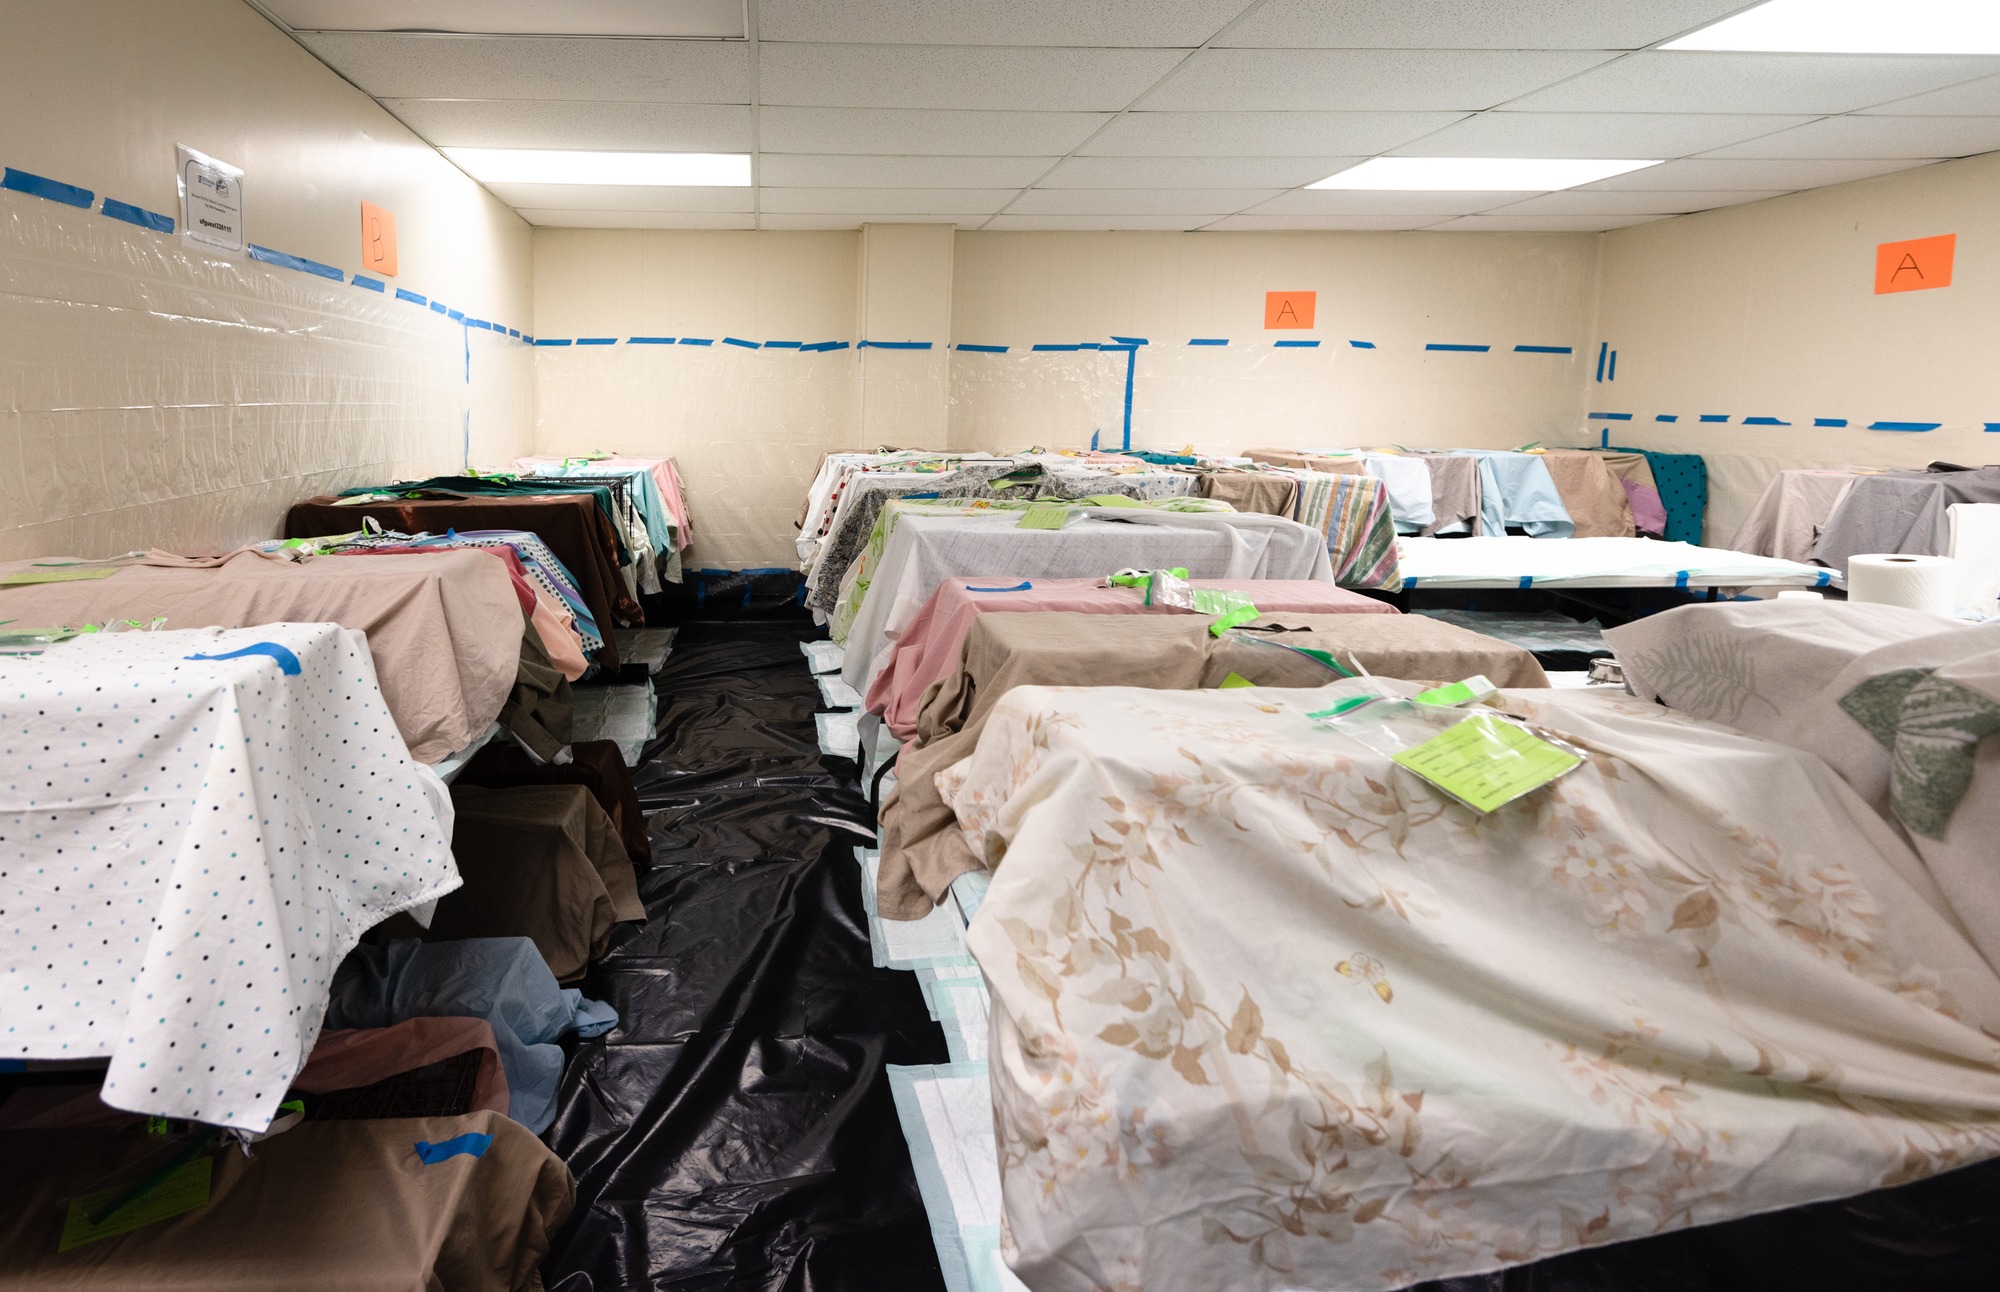 A room of cat carriers covered by blankets and towels while cats recover from surgery